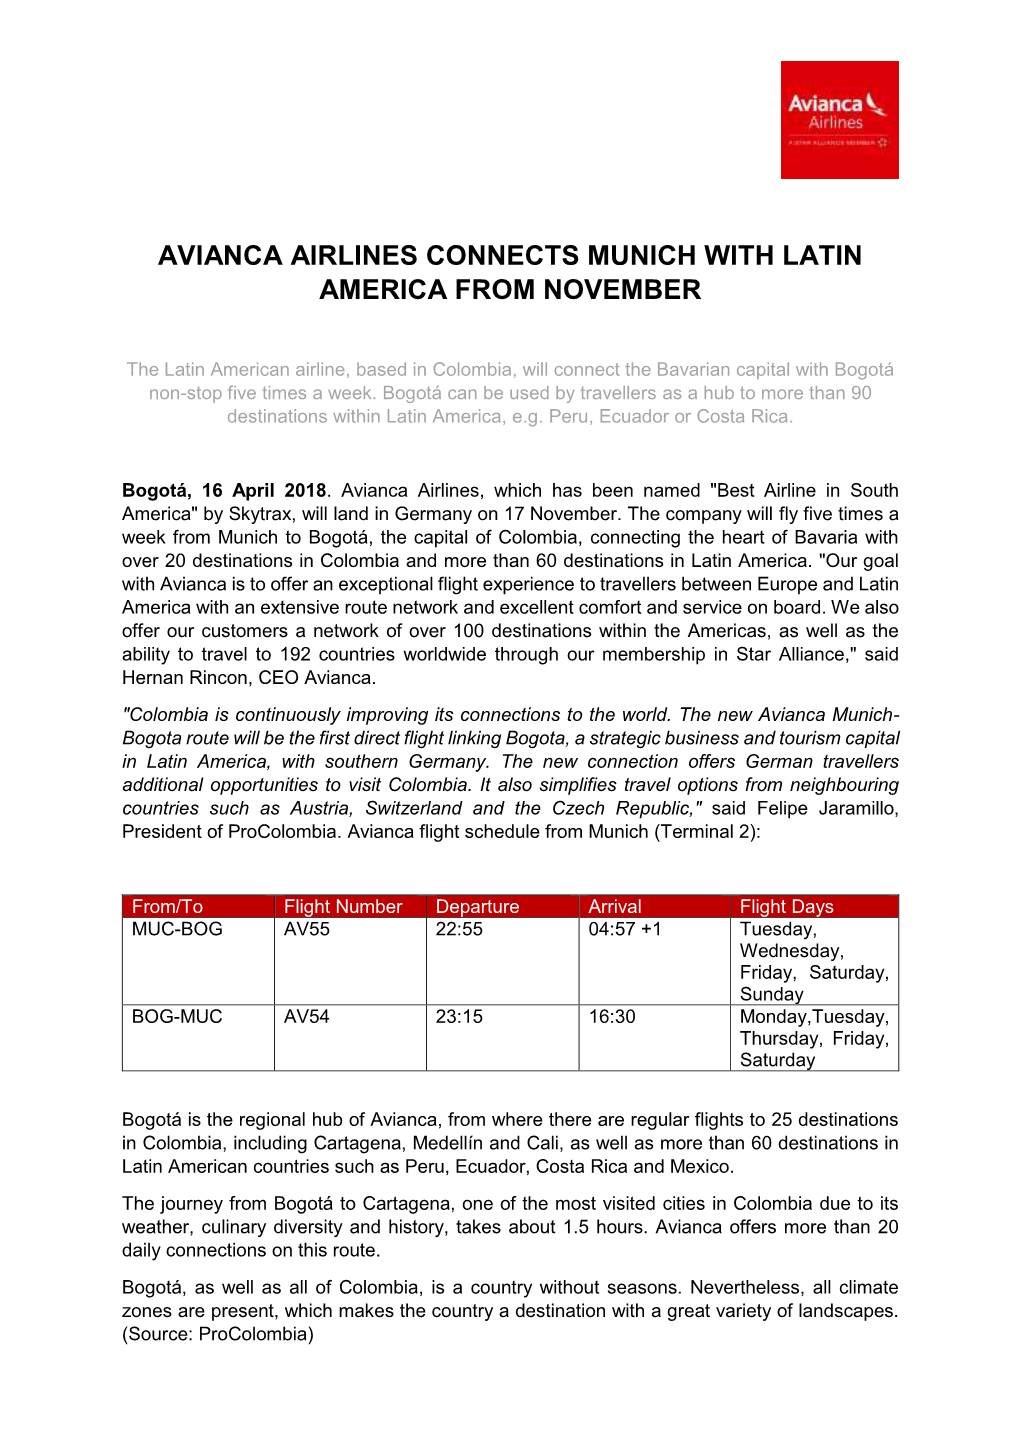 Avianca Airlines Connects Munich with Latin America from November